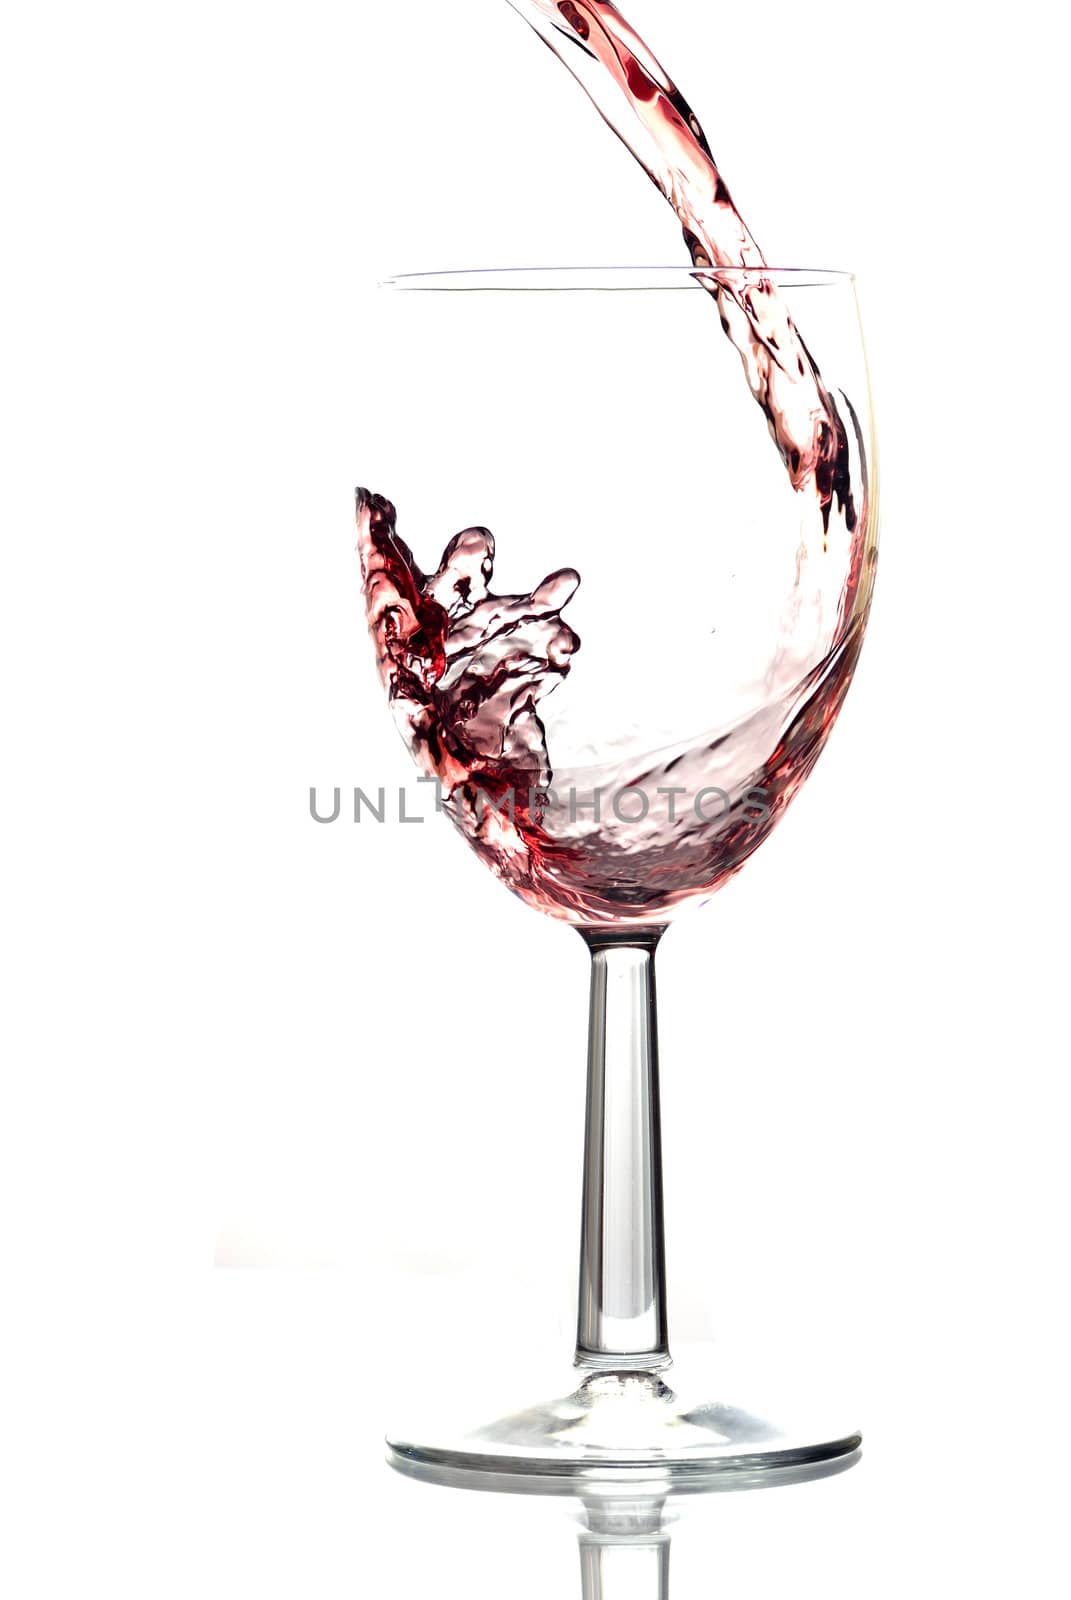 Pouring Red Wine, White Background by swellphotography